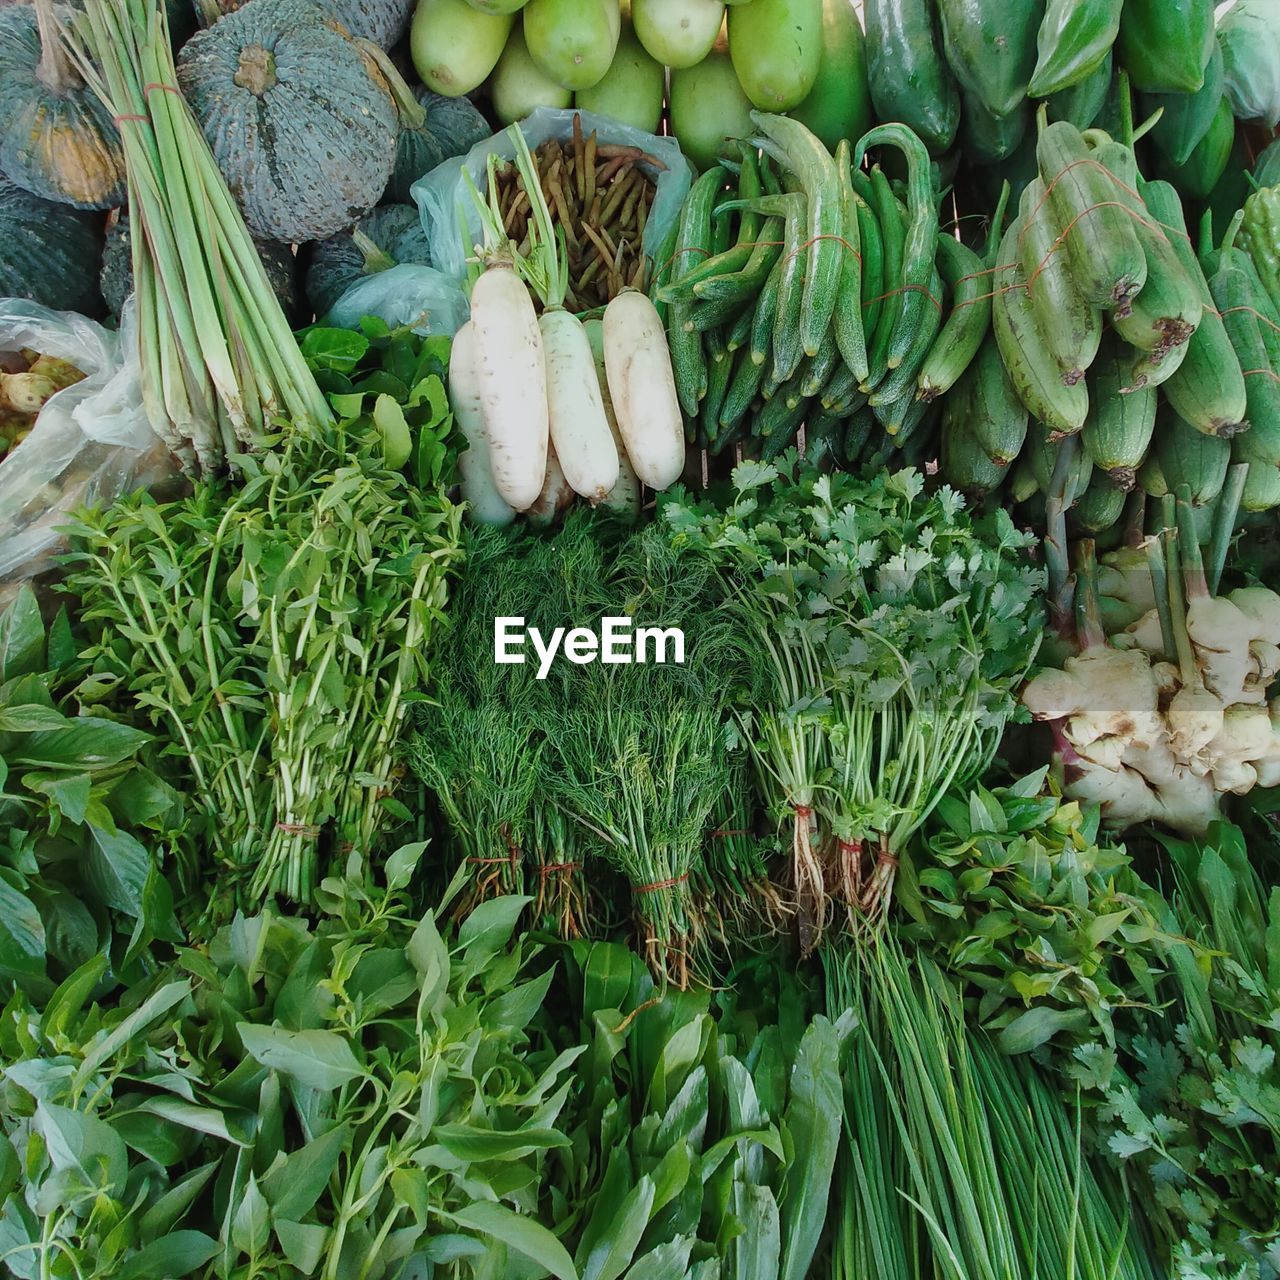 Vegetable in local market